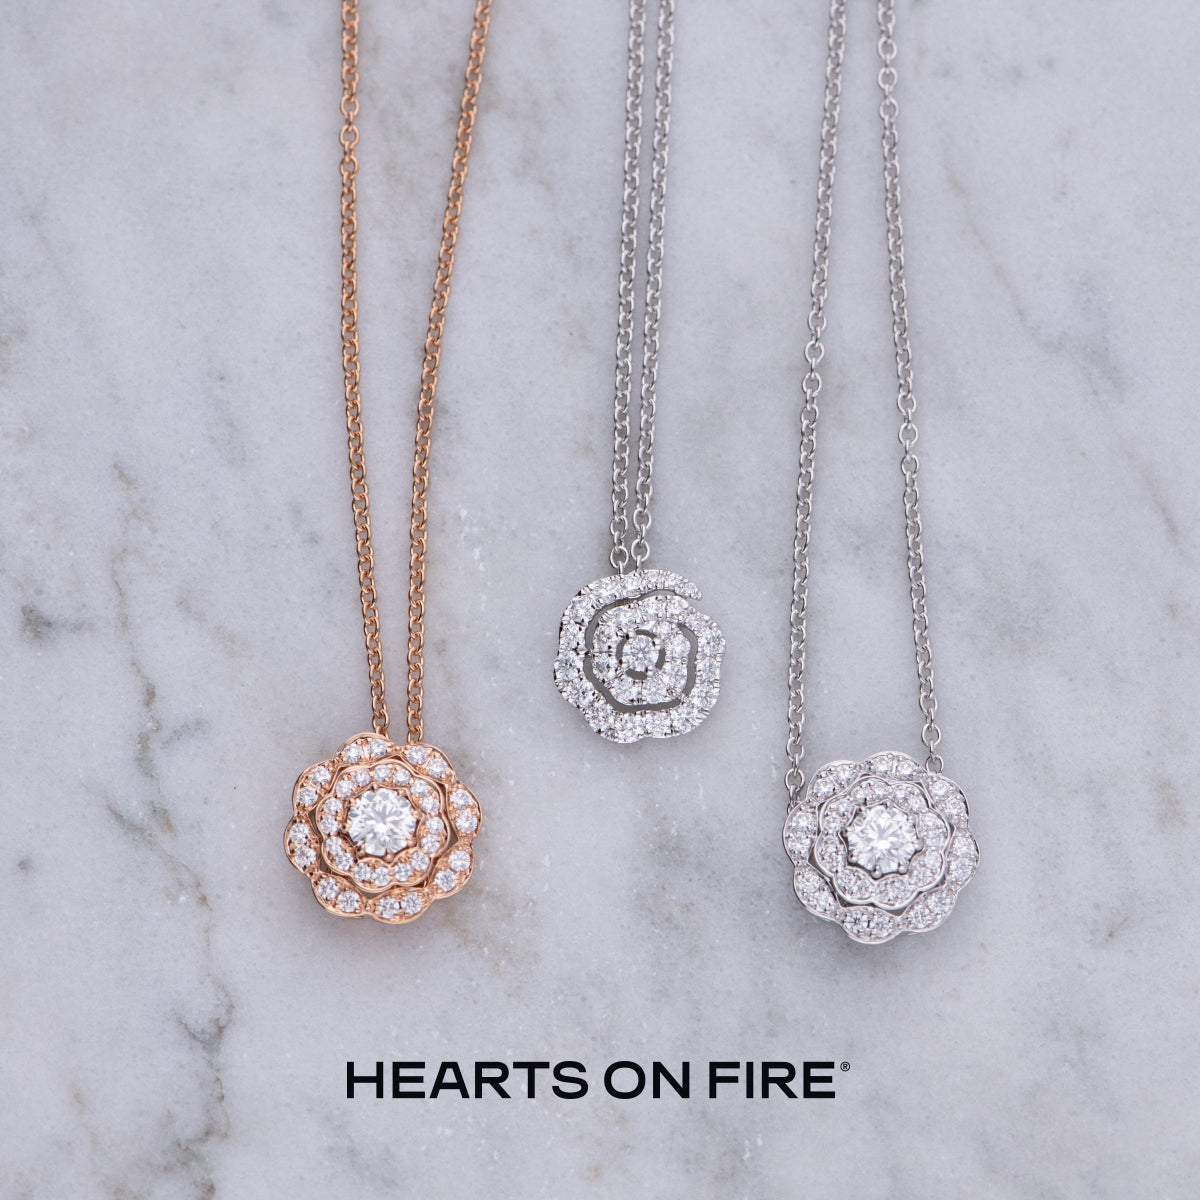 New Arrivals - Hearts on Fire